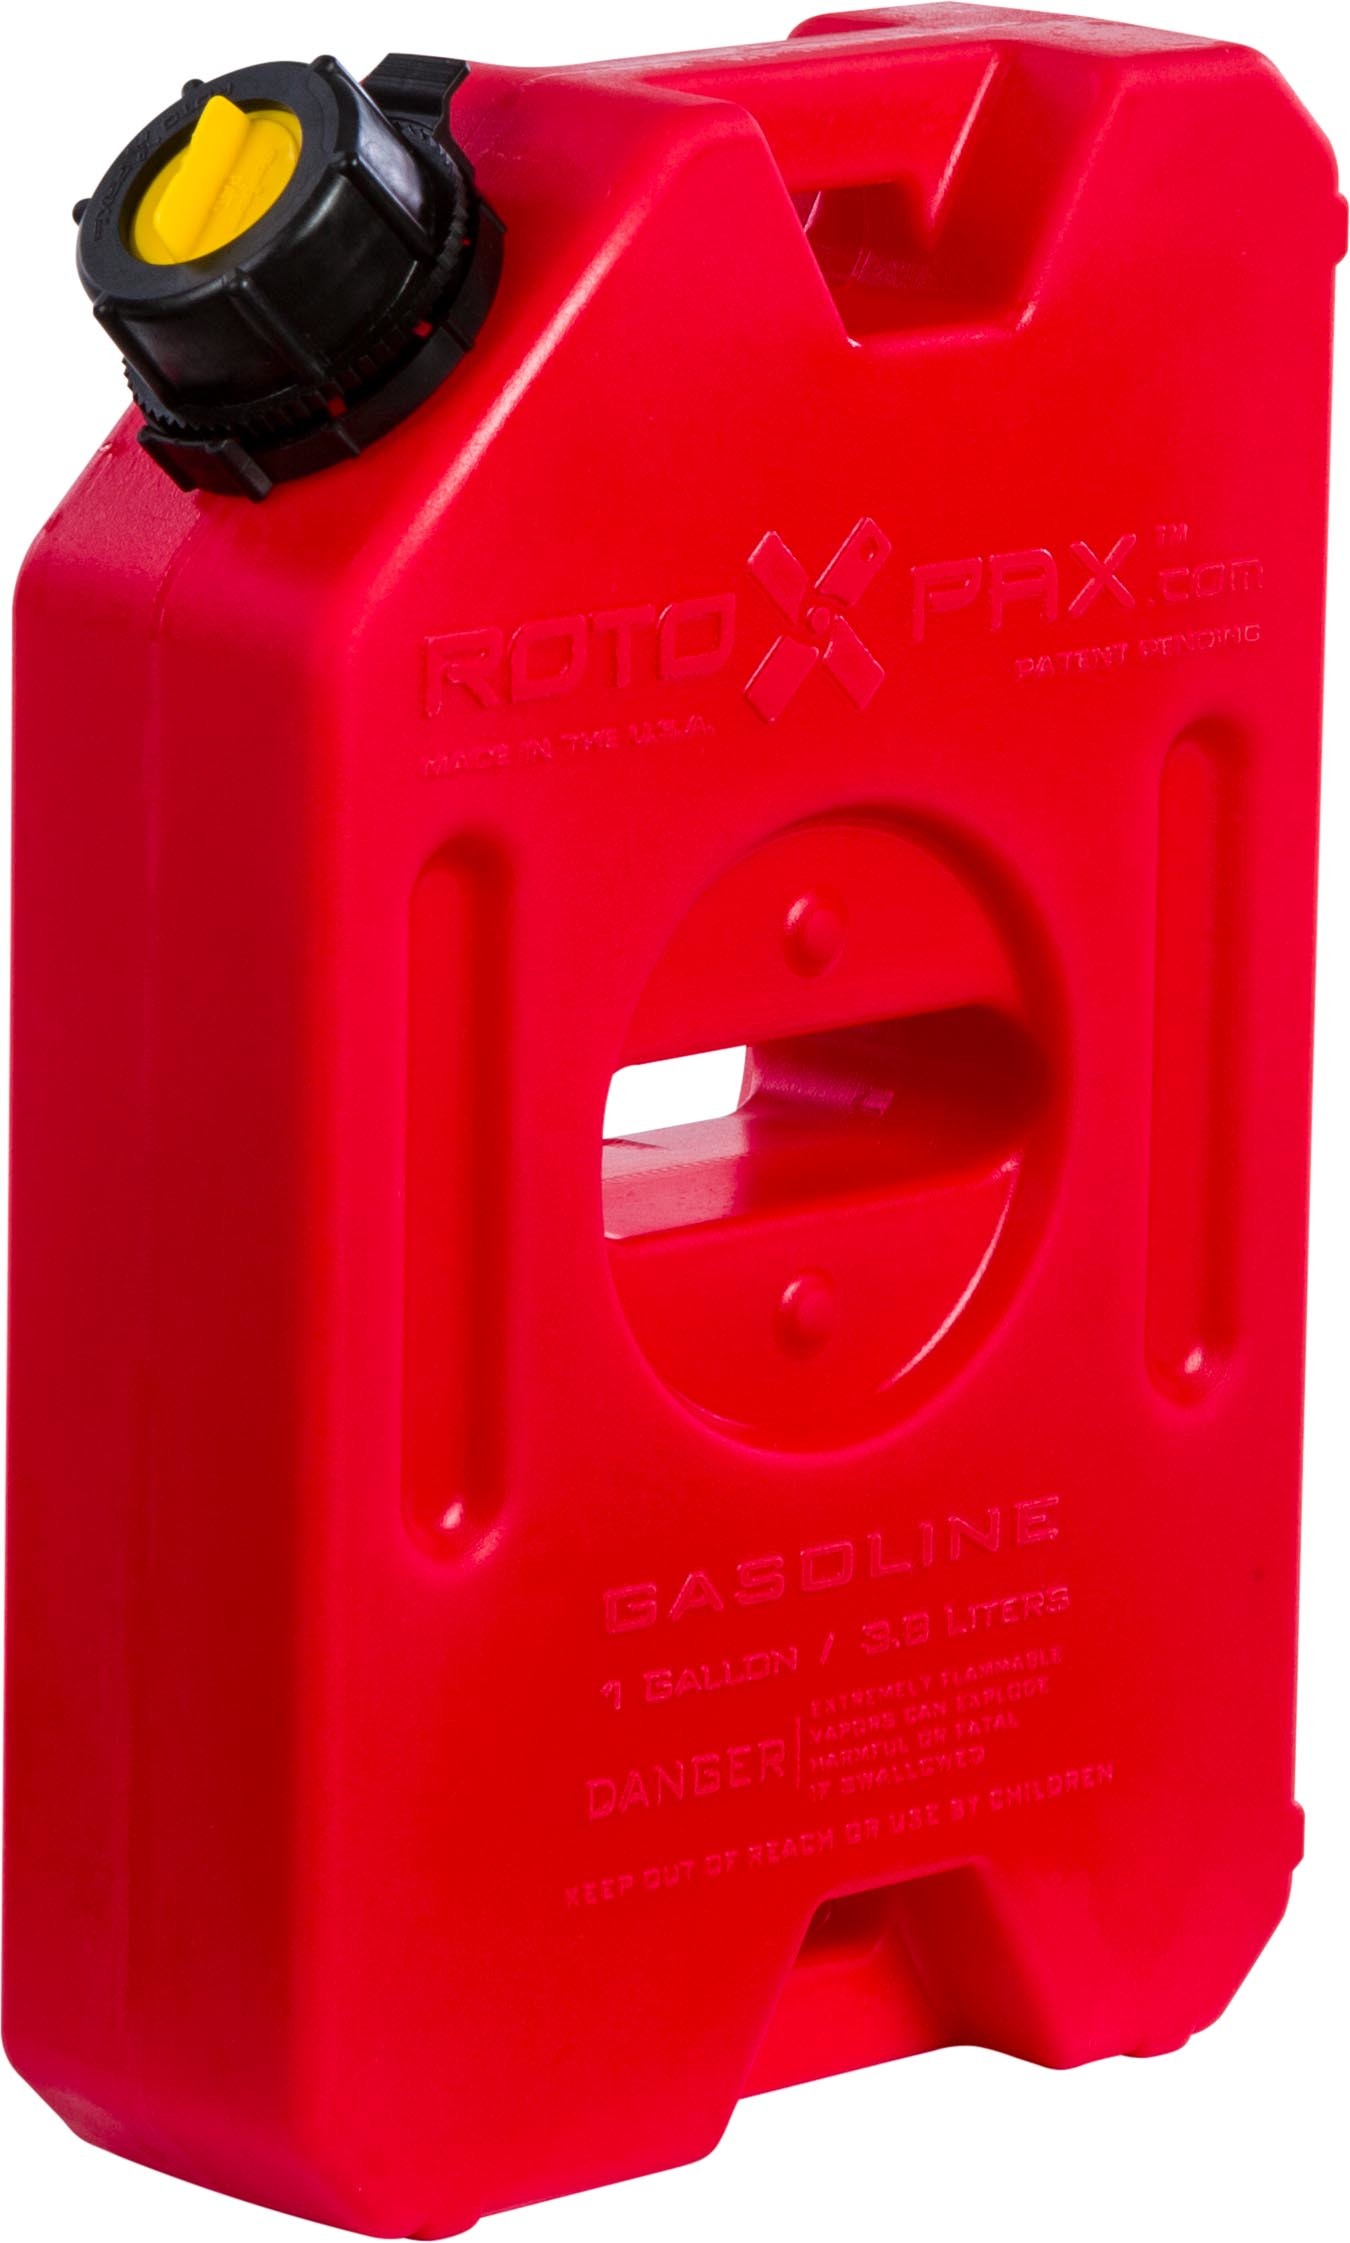 Rotopax - Fuel Container 1 Gal Carb - RX-1G - CARB